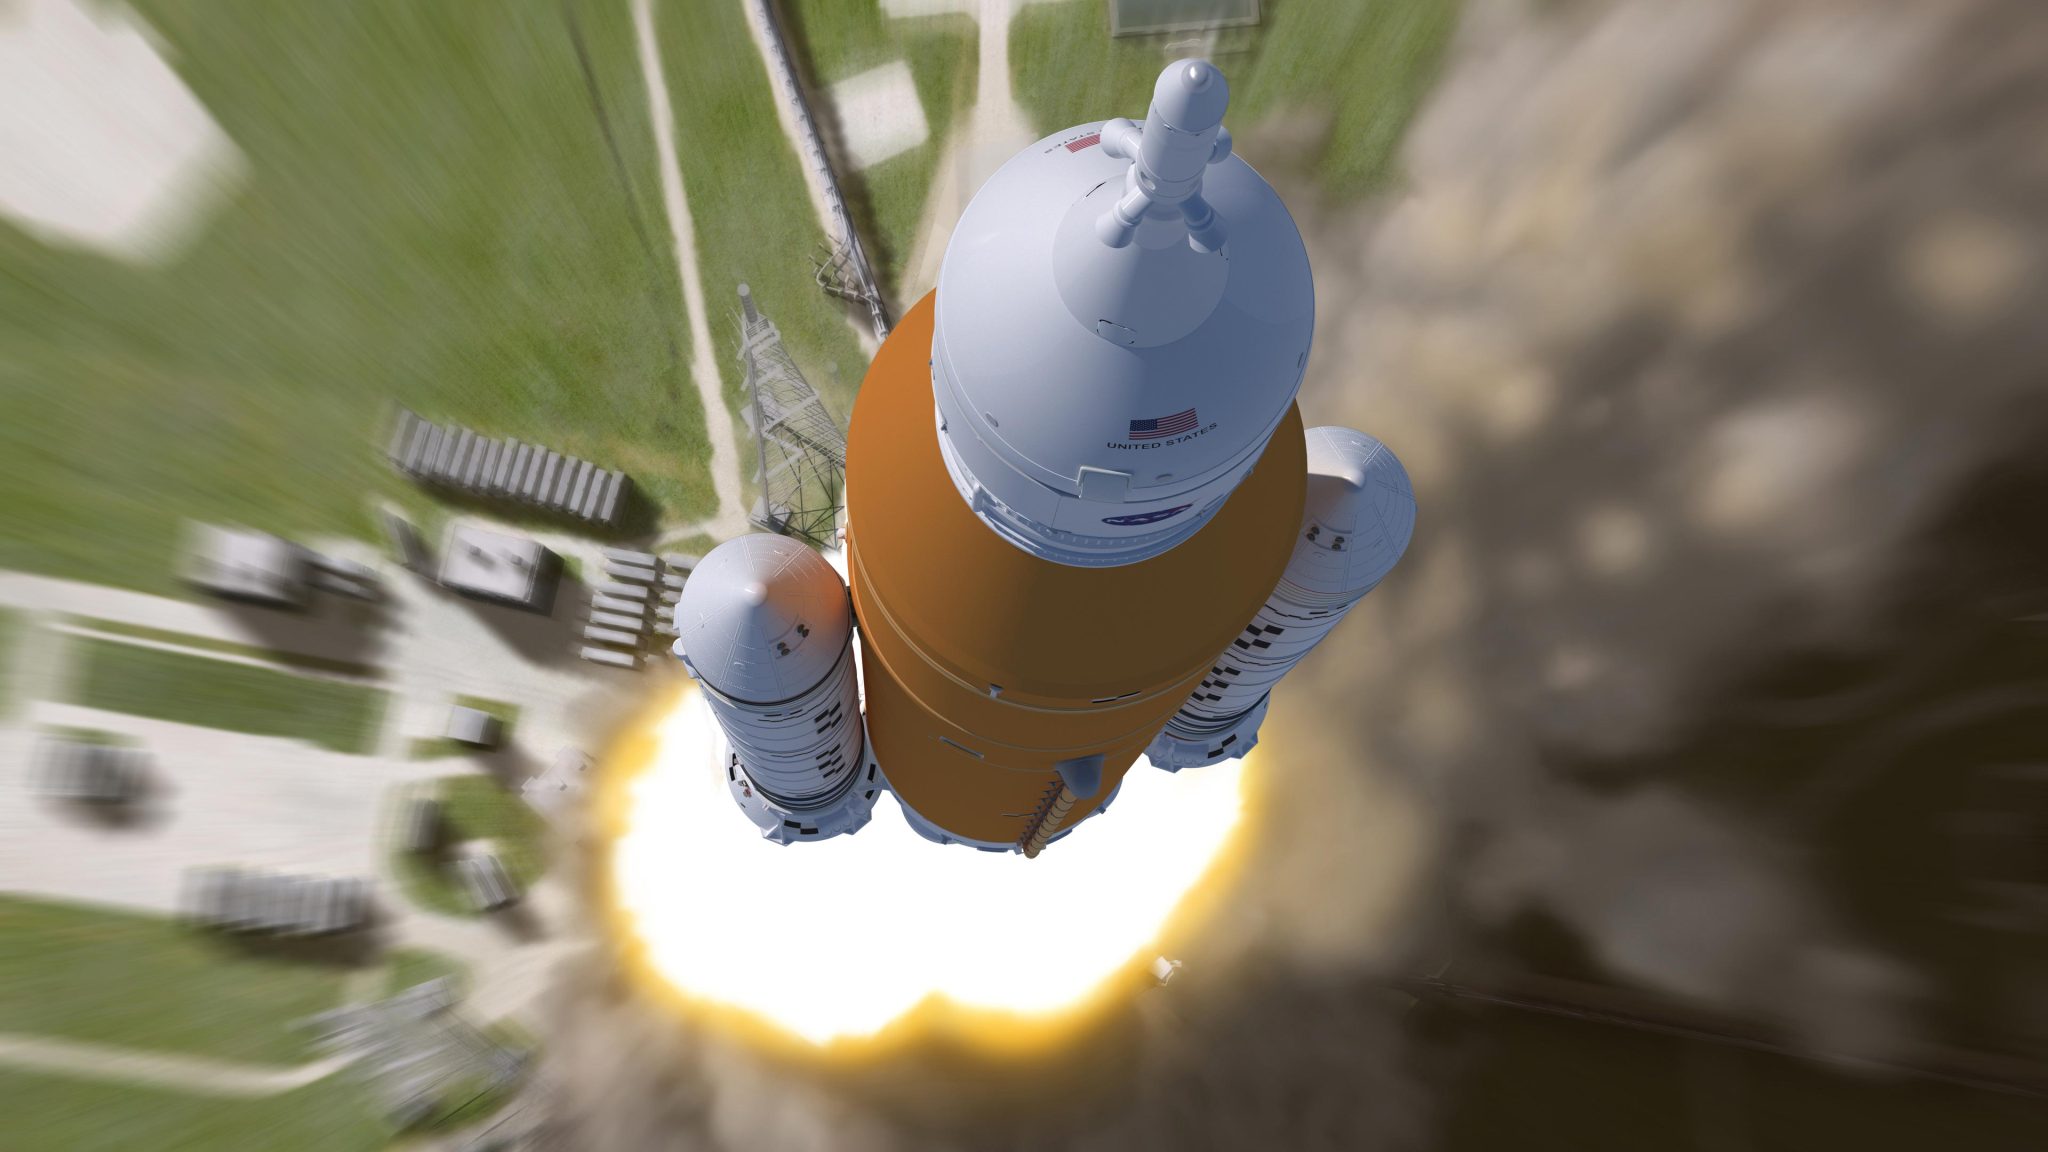 Launch of the Space Launch System (SLS) rocket.